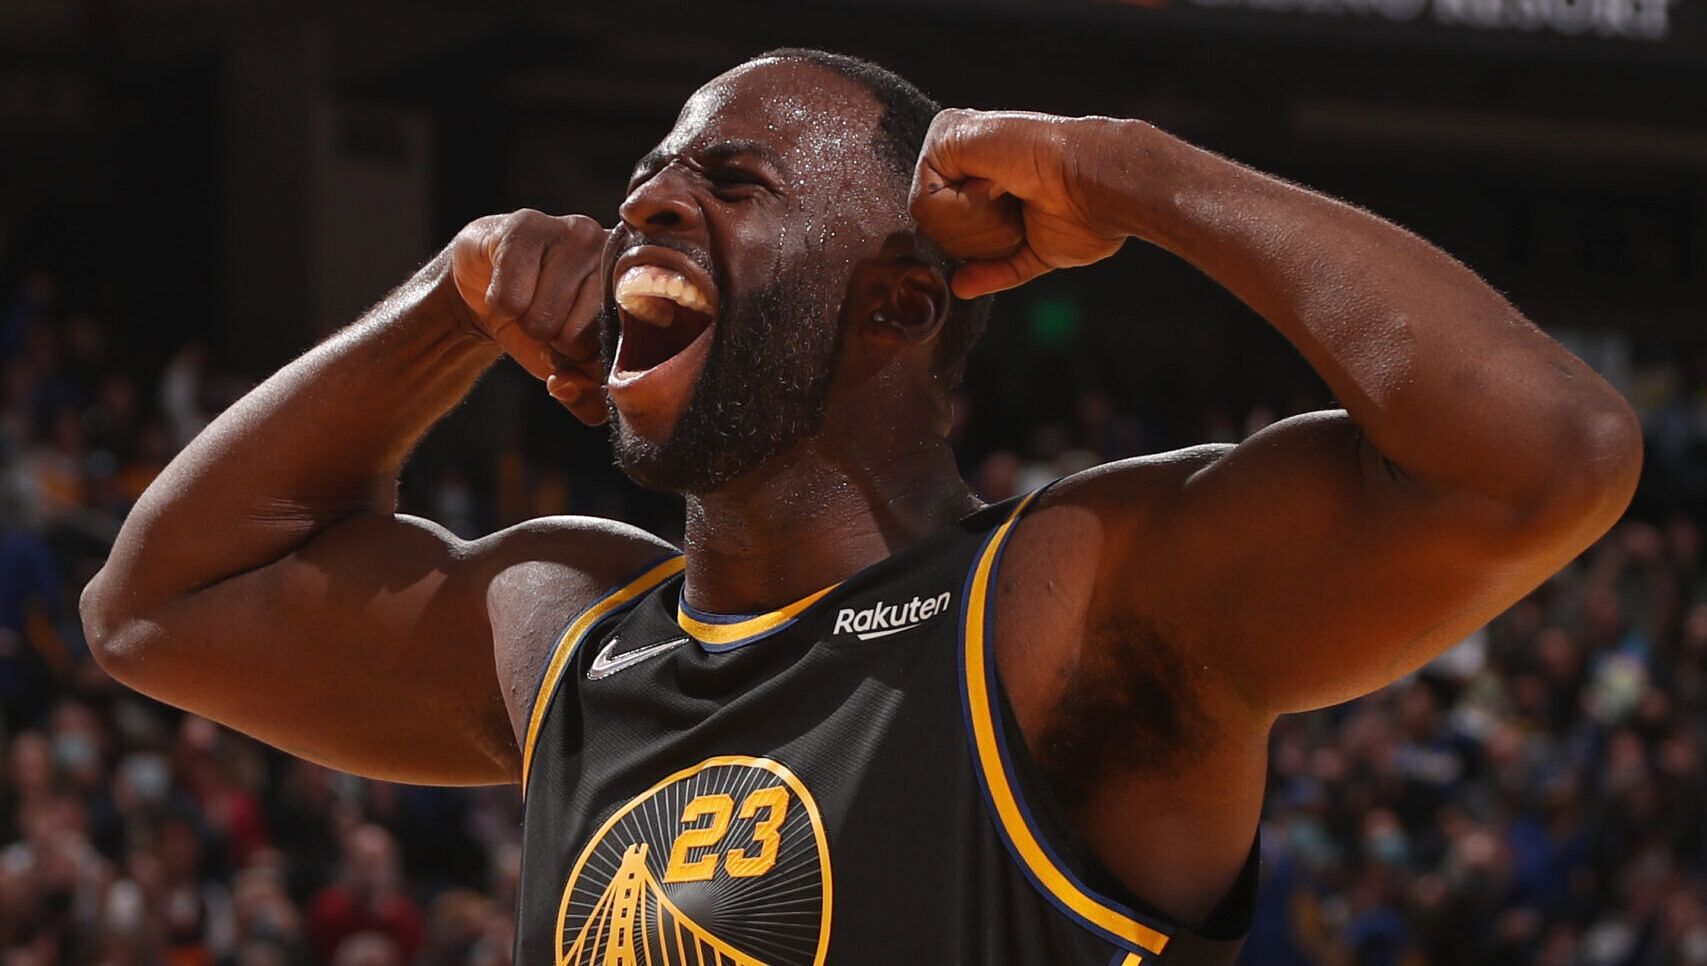 Warriors' Draymond Green “very happy” NBA rescinded his 15th technical foul  – East Bay Times